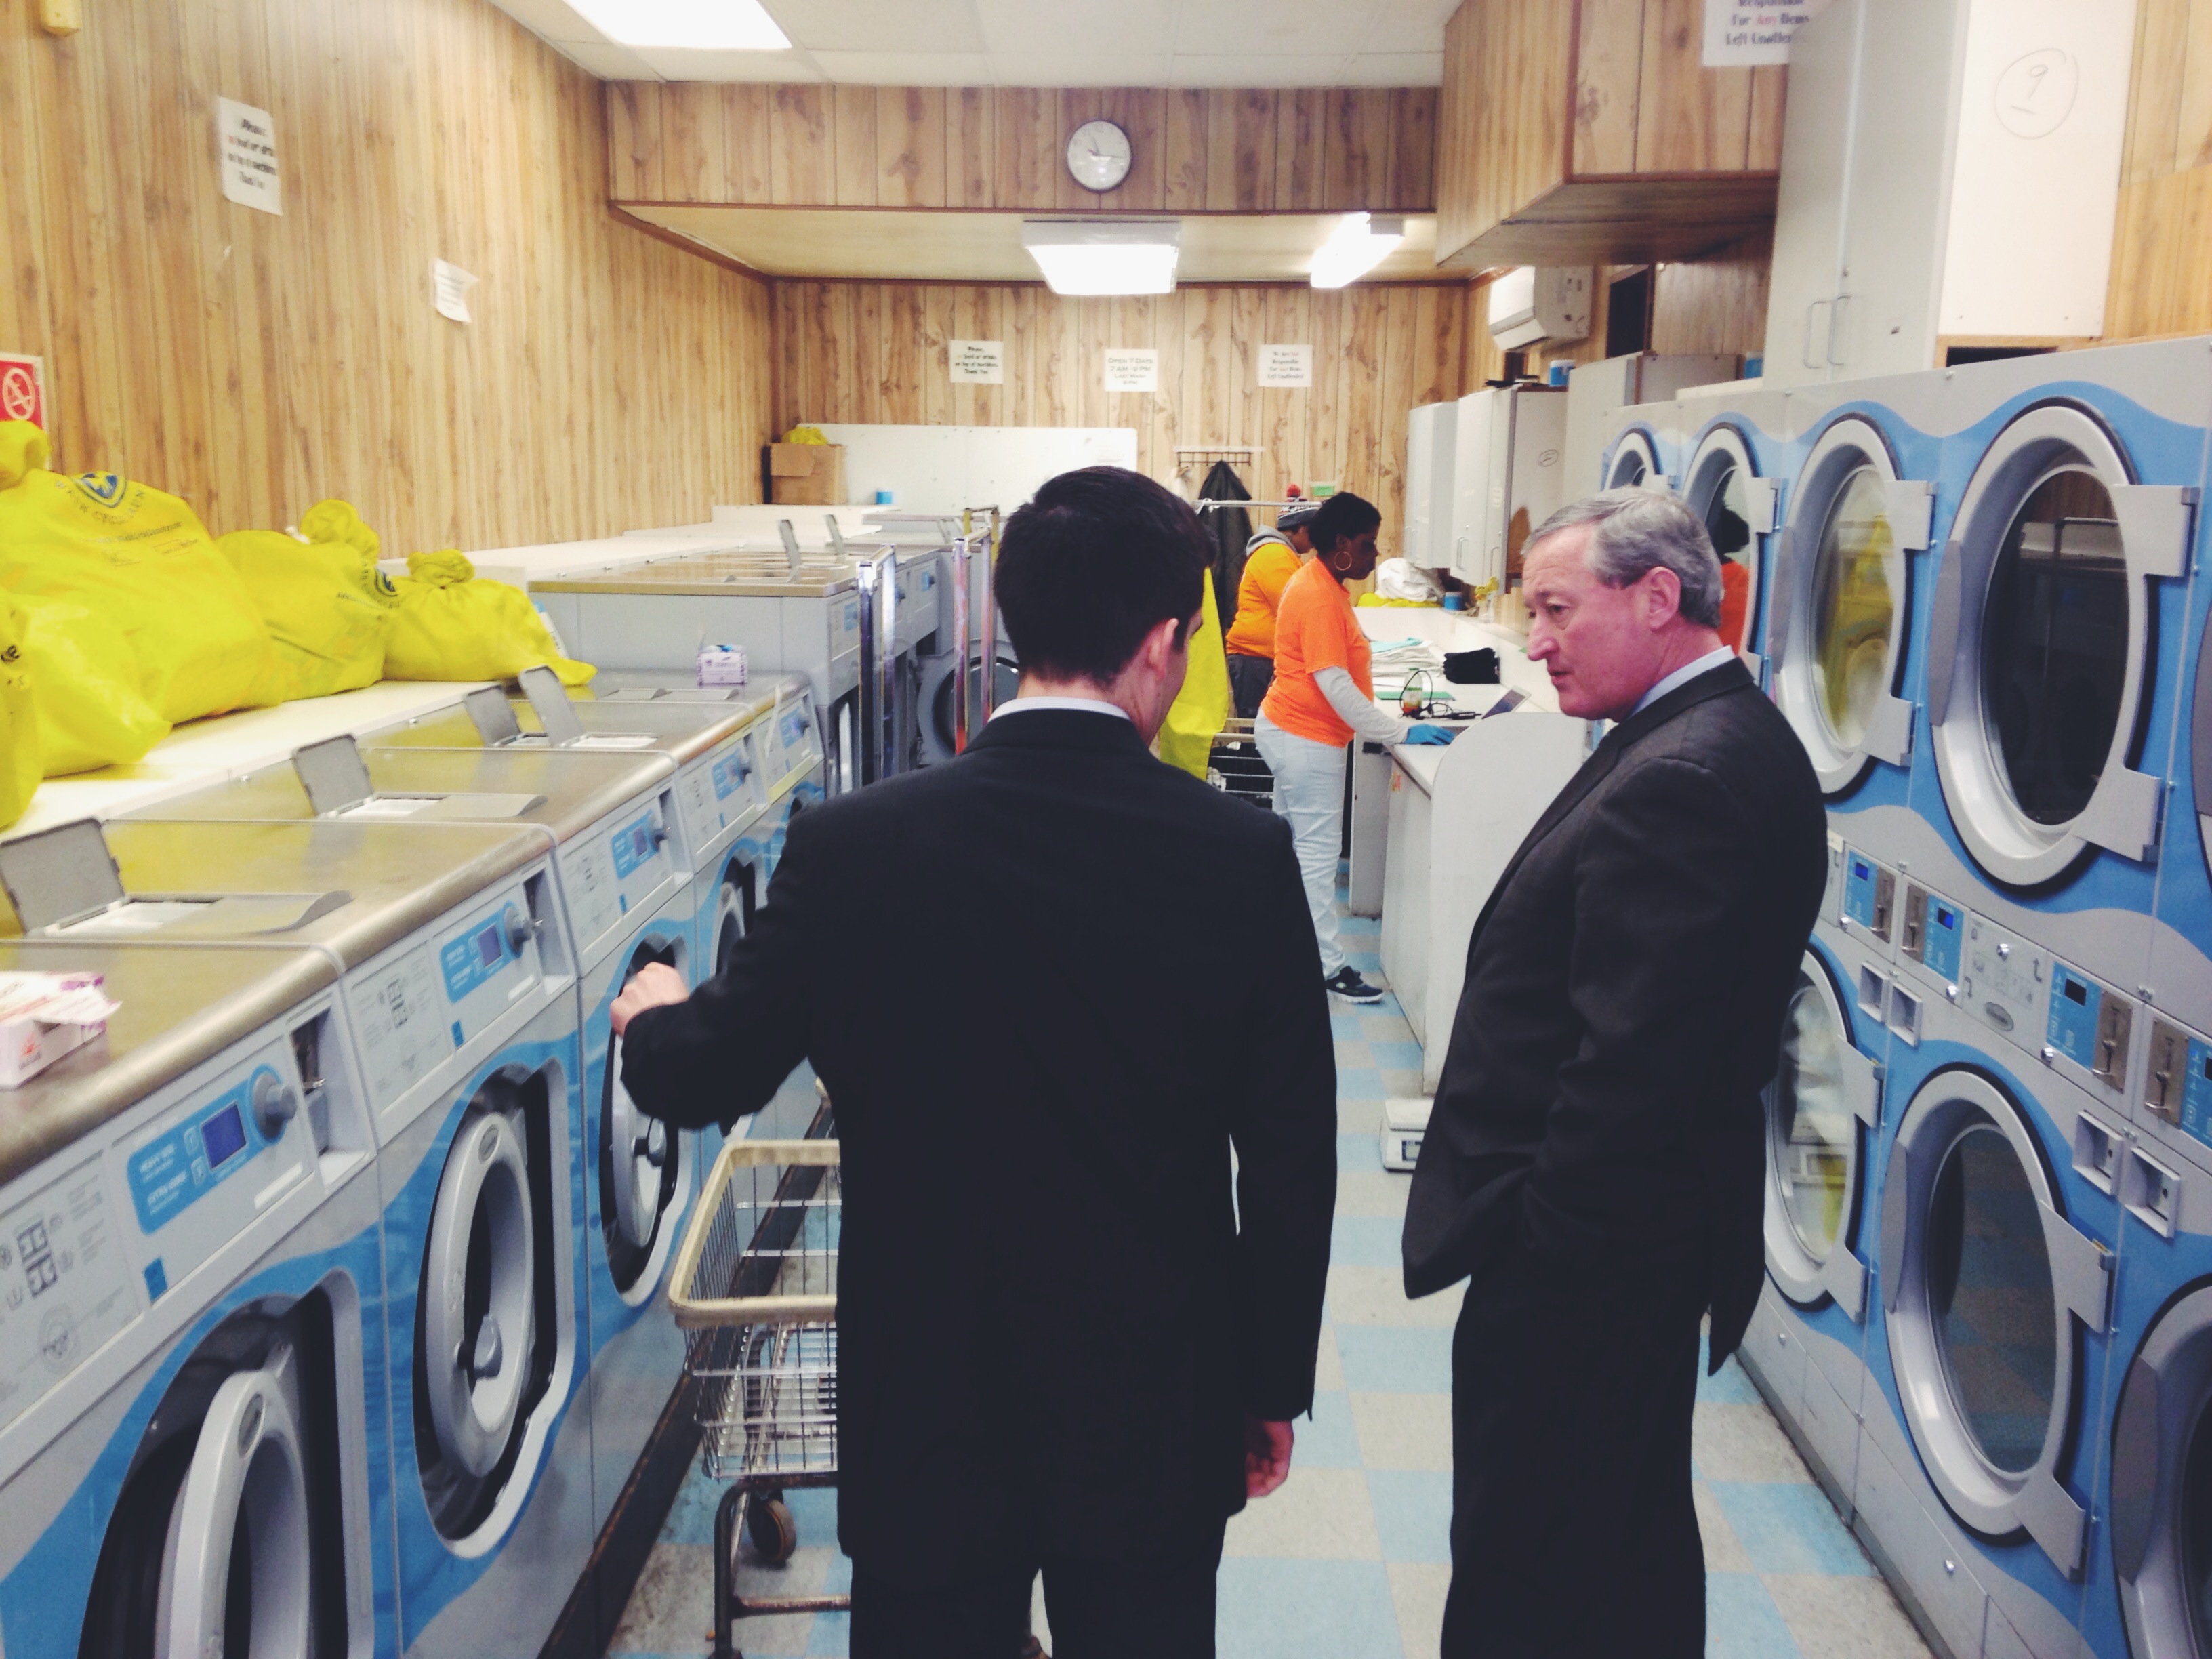 Jim Kenney at Wash Cycle Laundry